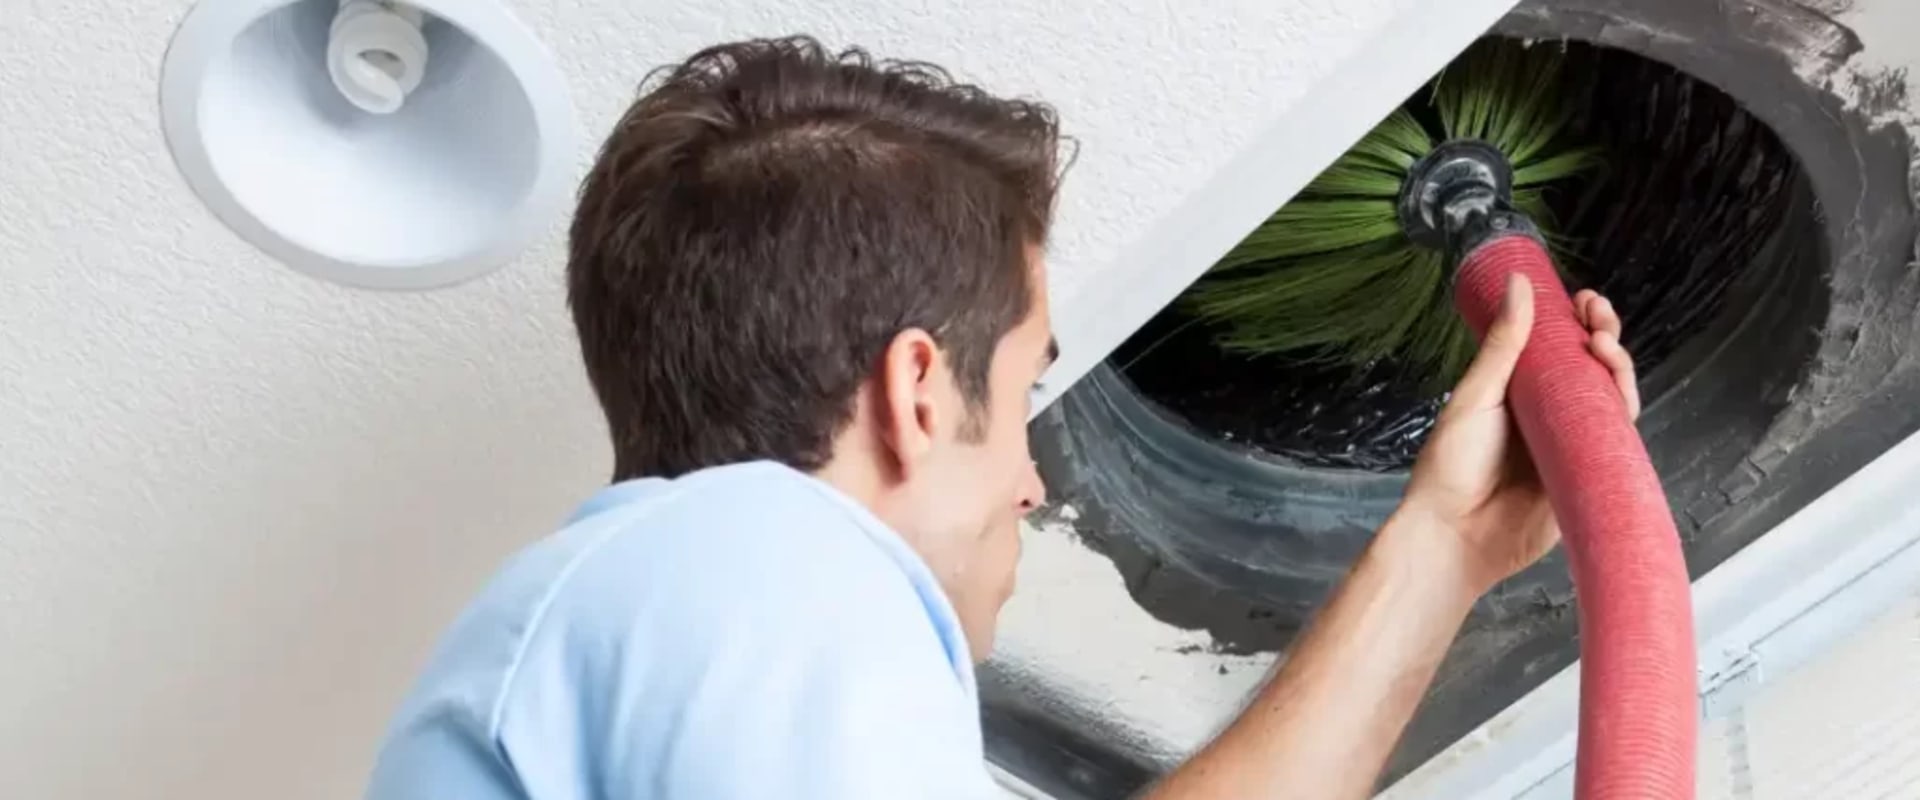 Achieve Cleaner Air With Top Duct Cleaning Near Delray Beach FL And Effective Duct Sealing